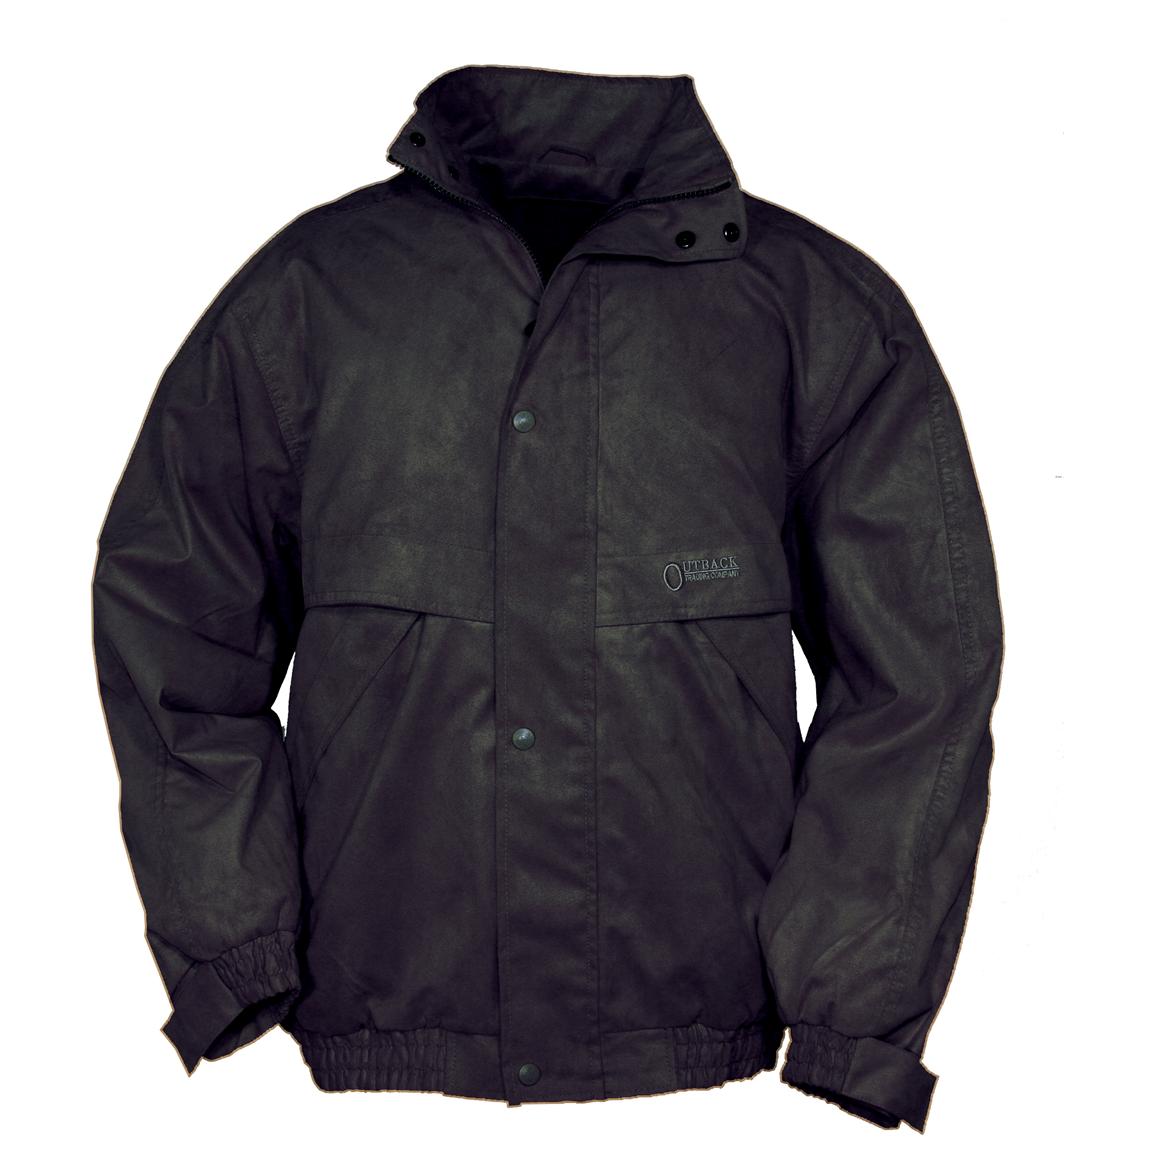 Men's Outback Trading Company® Rambler Jacket - 185845, Insulated ...